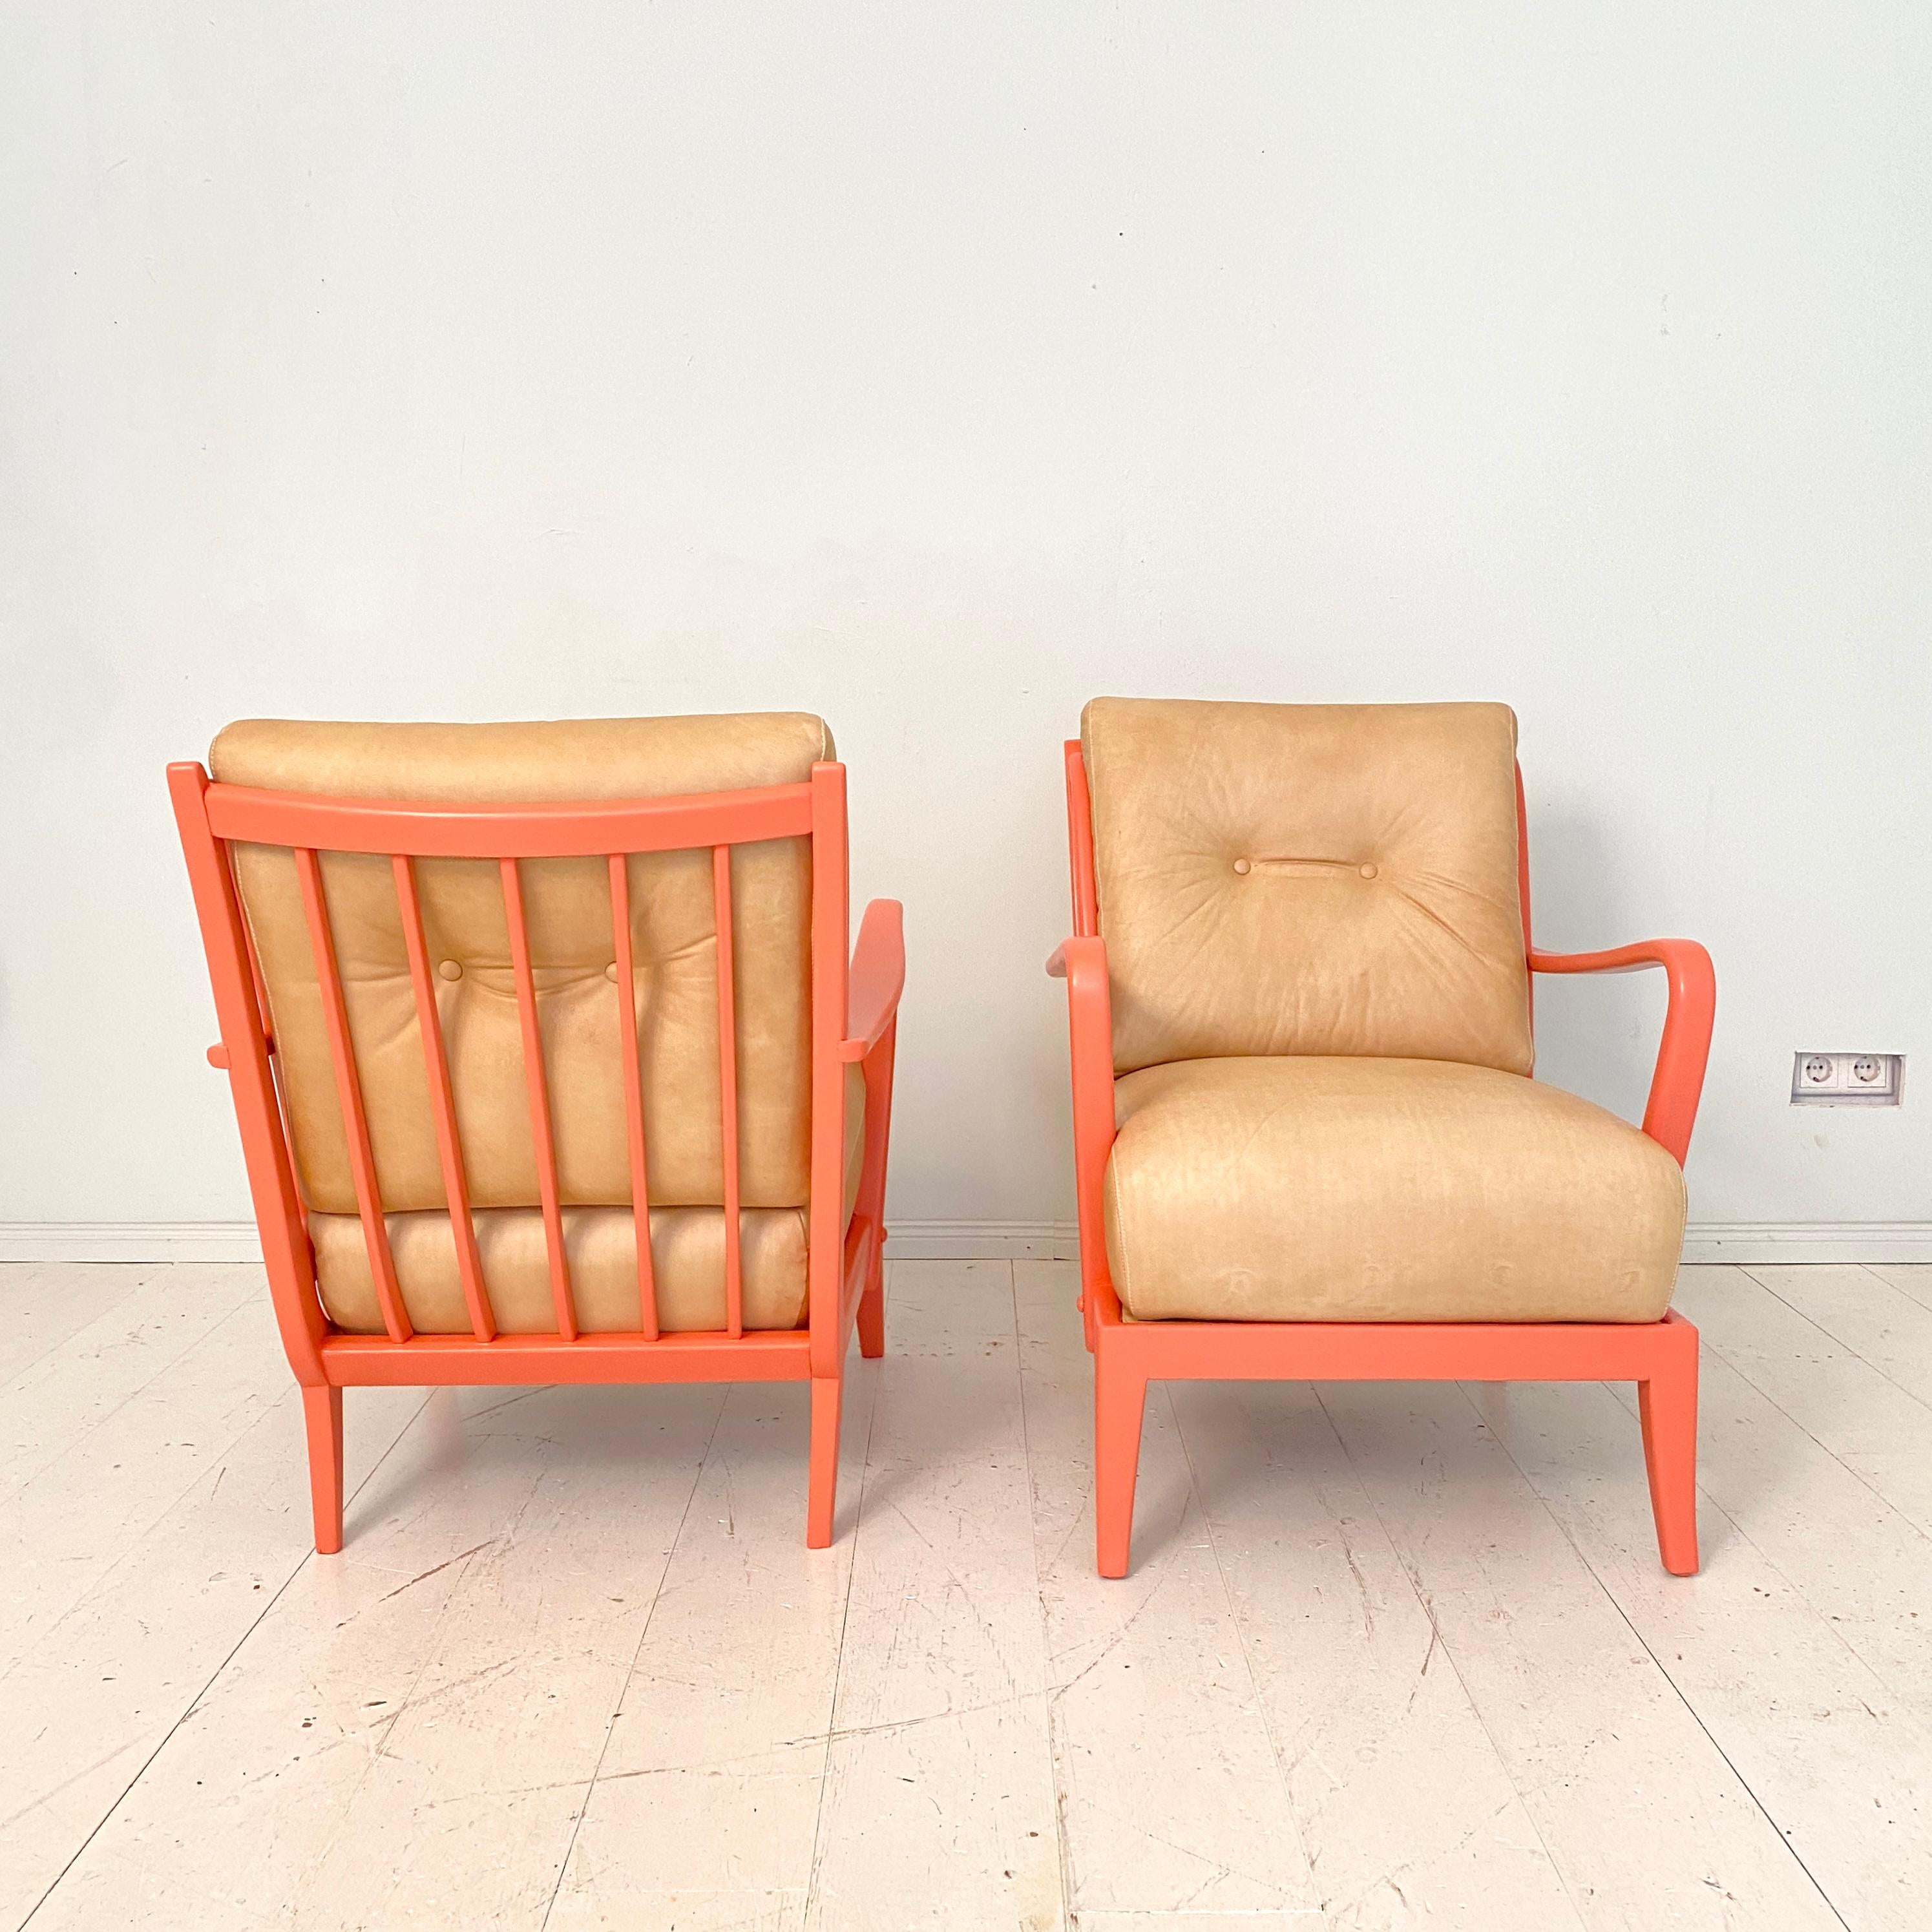 Pair of Italian Mid Century Lounge Chairs in Coral Color and Beige Leather, 1950 1